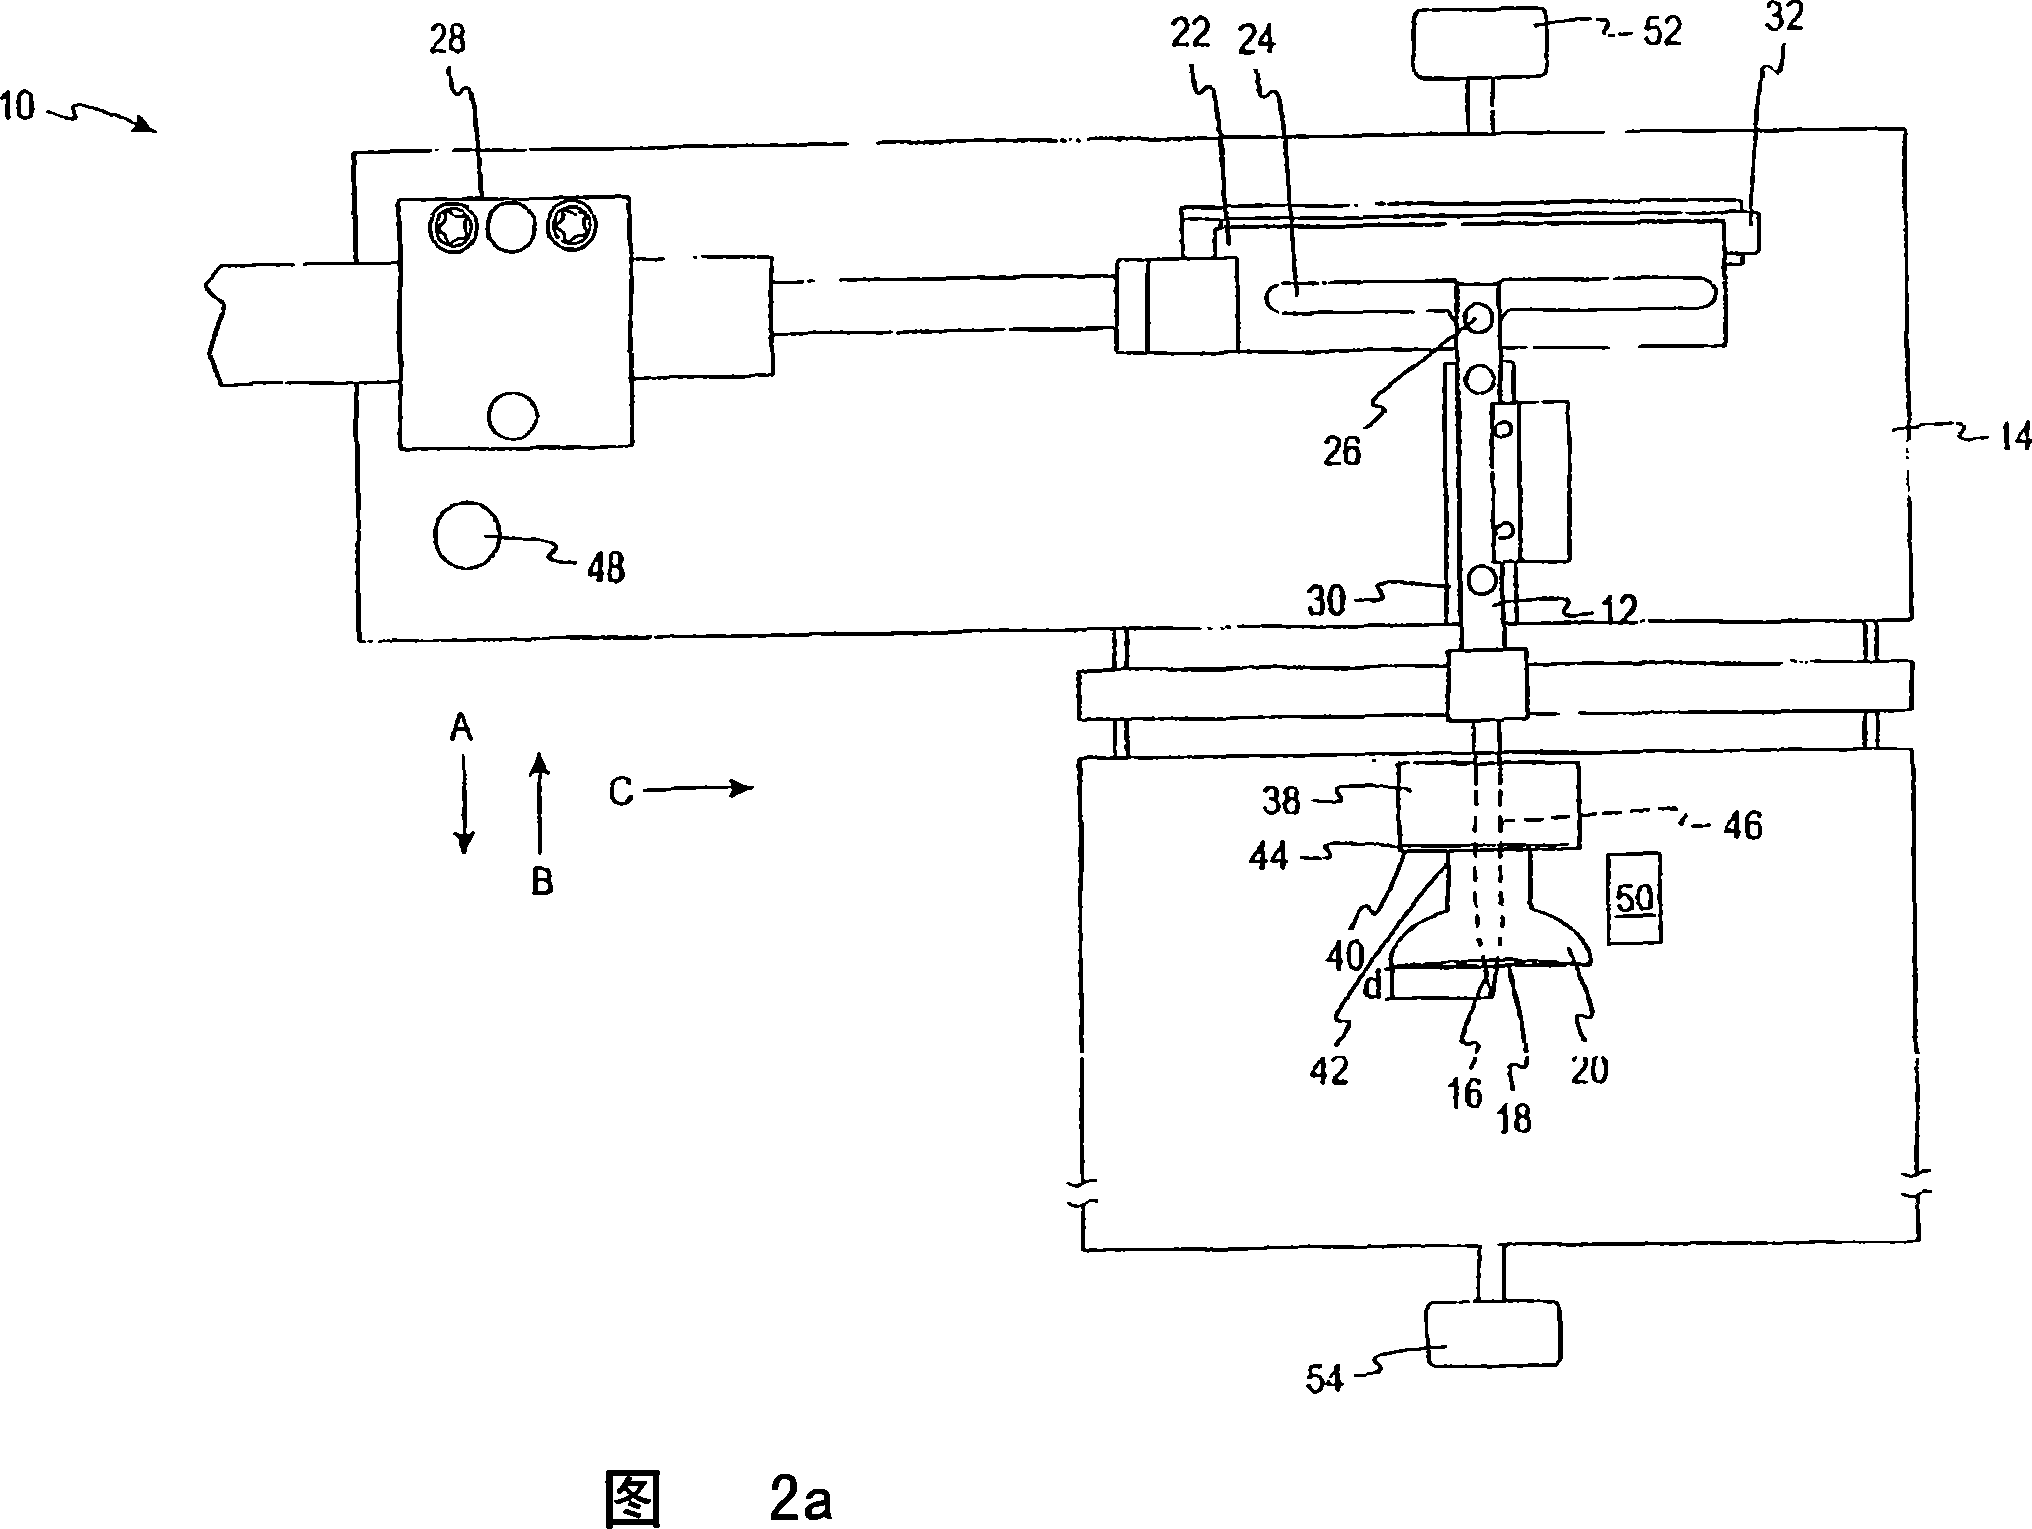 Single puncture lancing fixture with depth adjustment and control of contact force